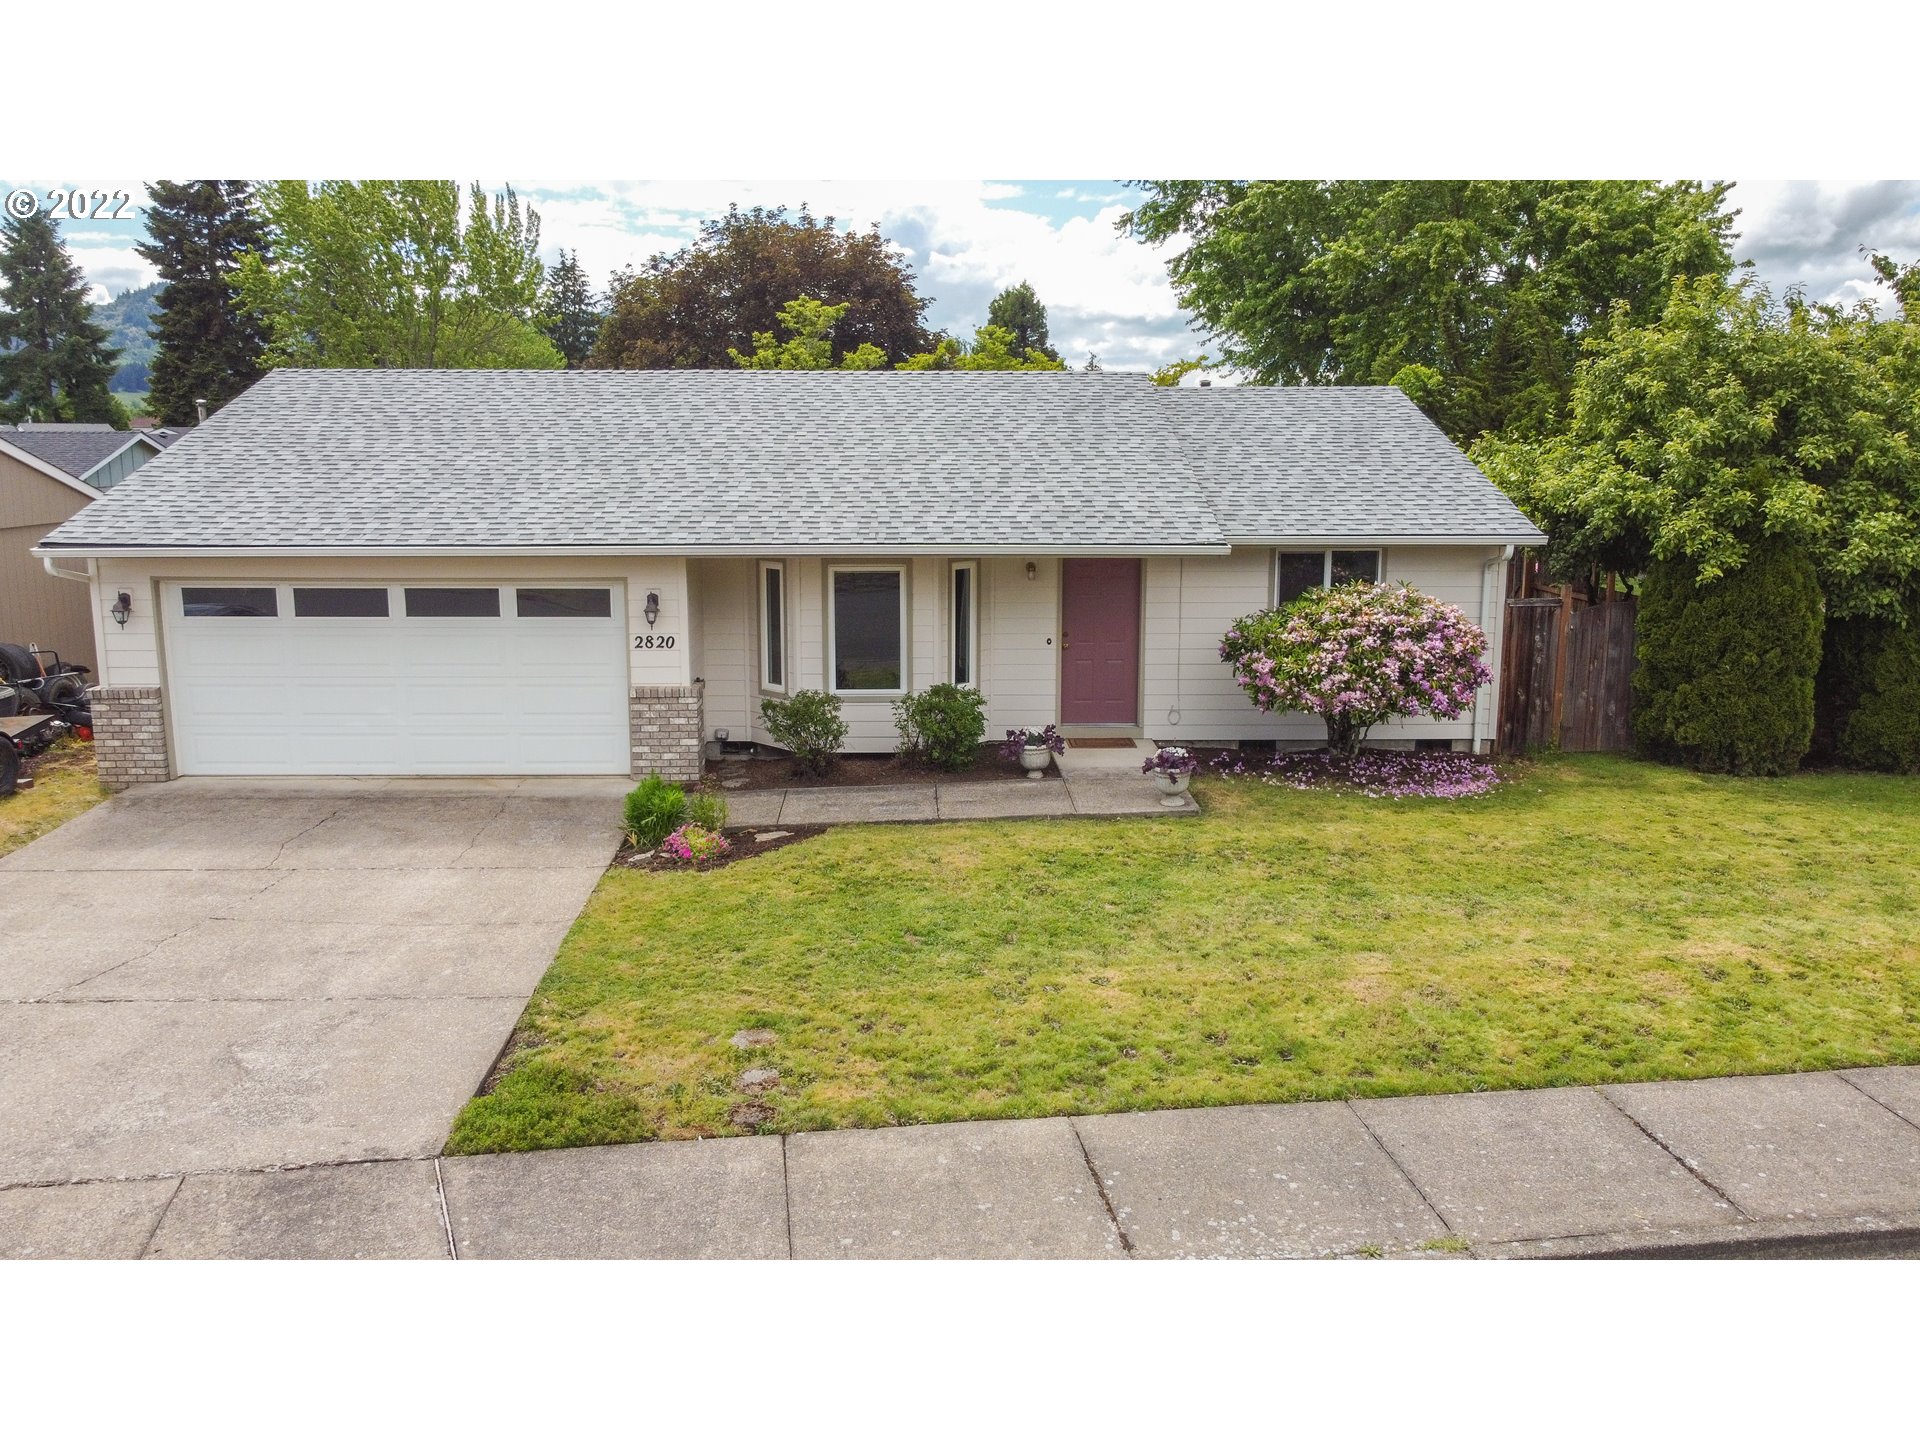 2820 S 8TH ST Eugene Home Listings - Galand Haas Real Estate